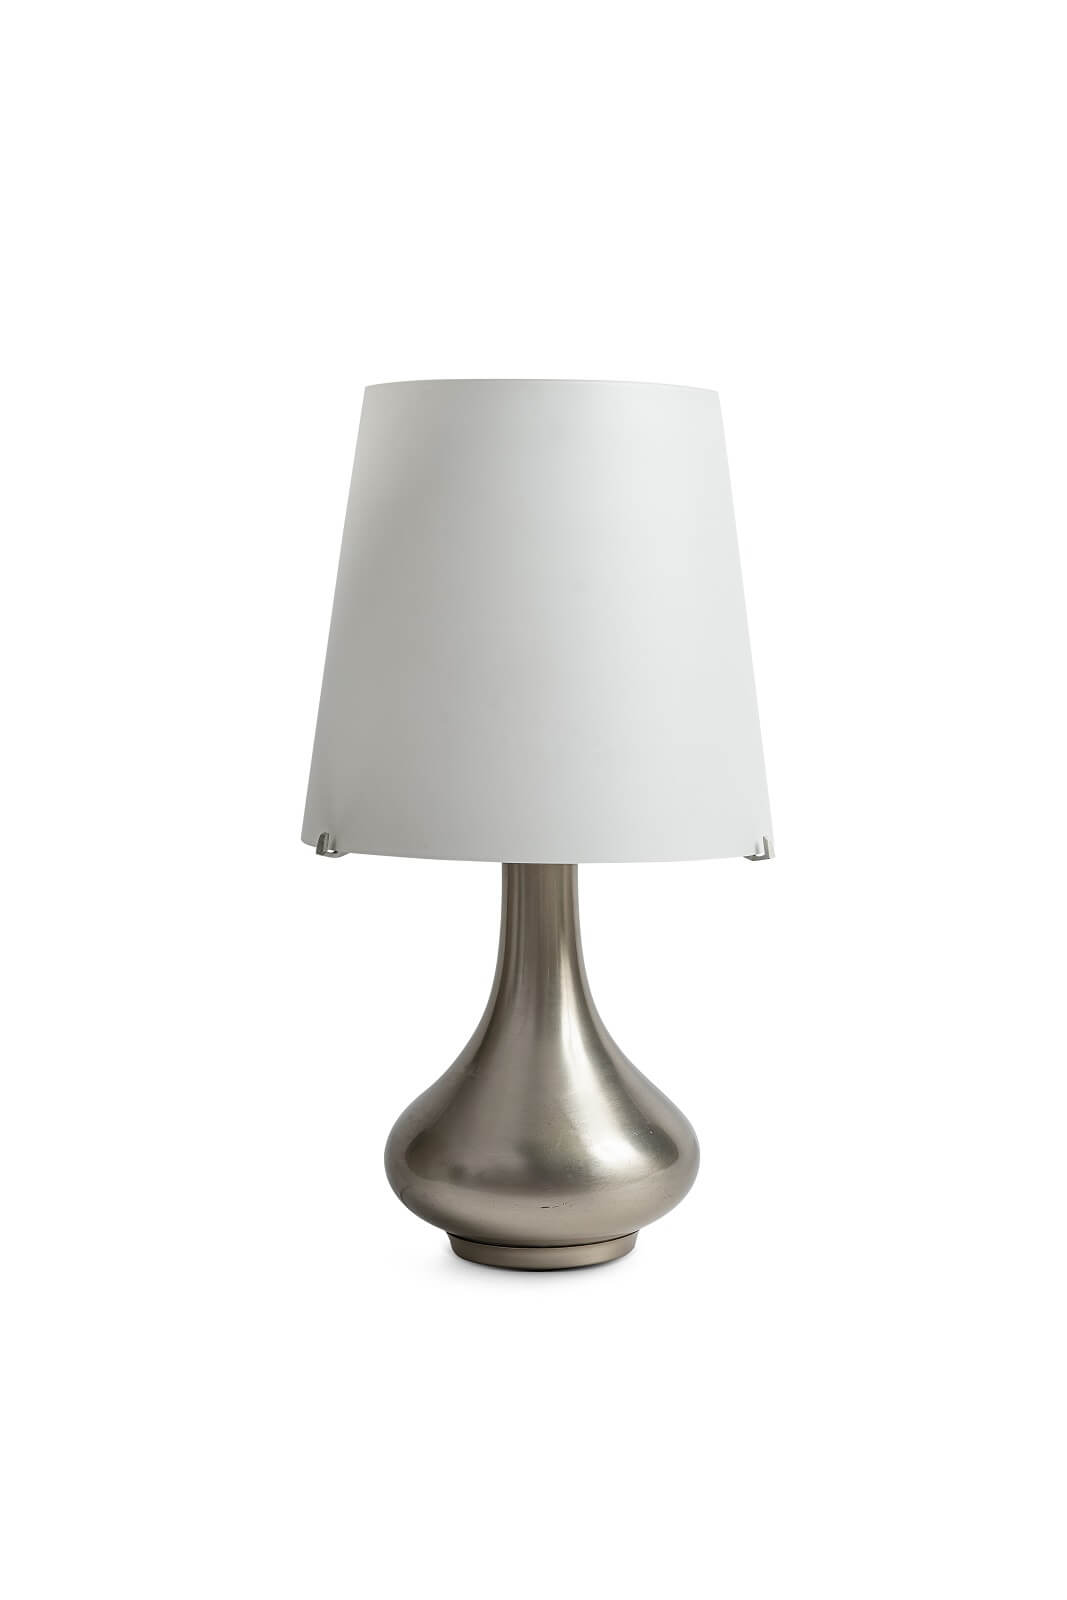 Table lamp mod. 2344 by Max Ingrand for sale